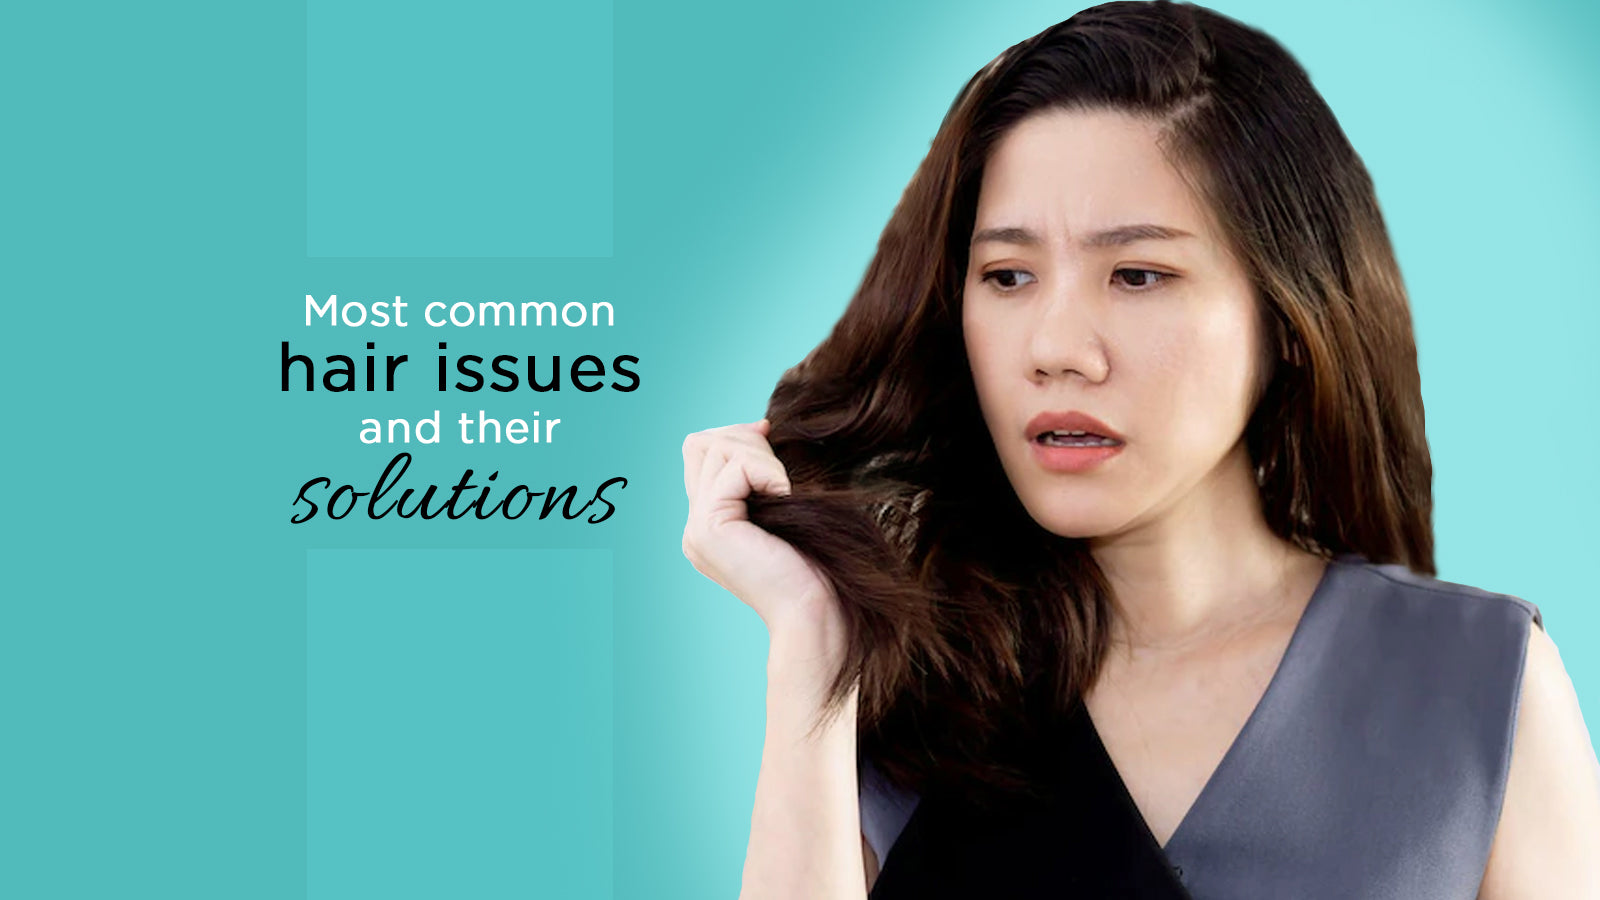 Most common hair issues and their solutions